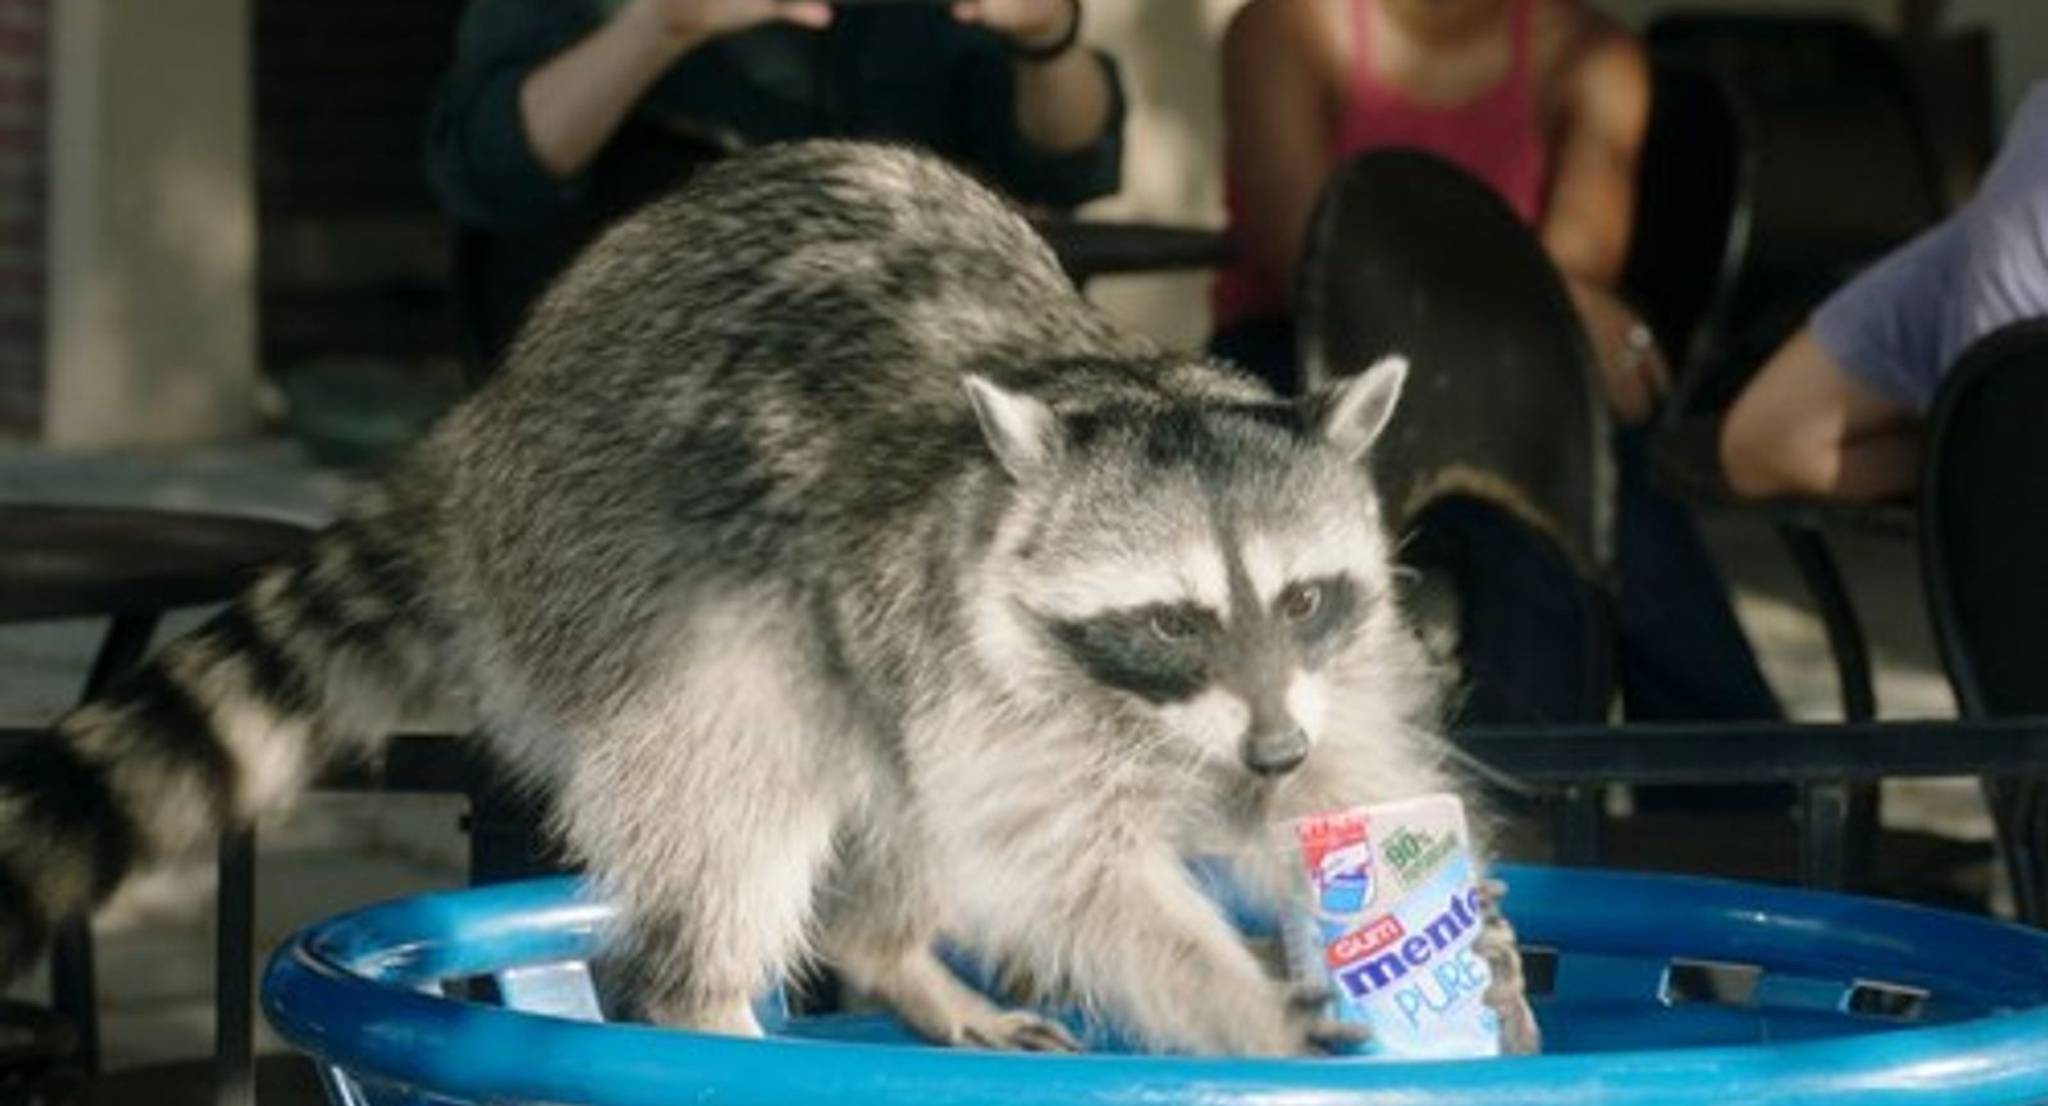 Mentos calls on Americans to get better at recycling